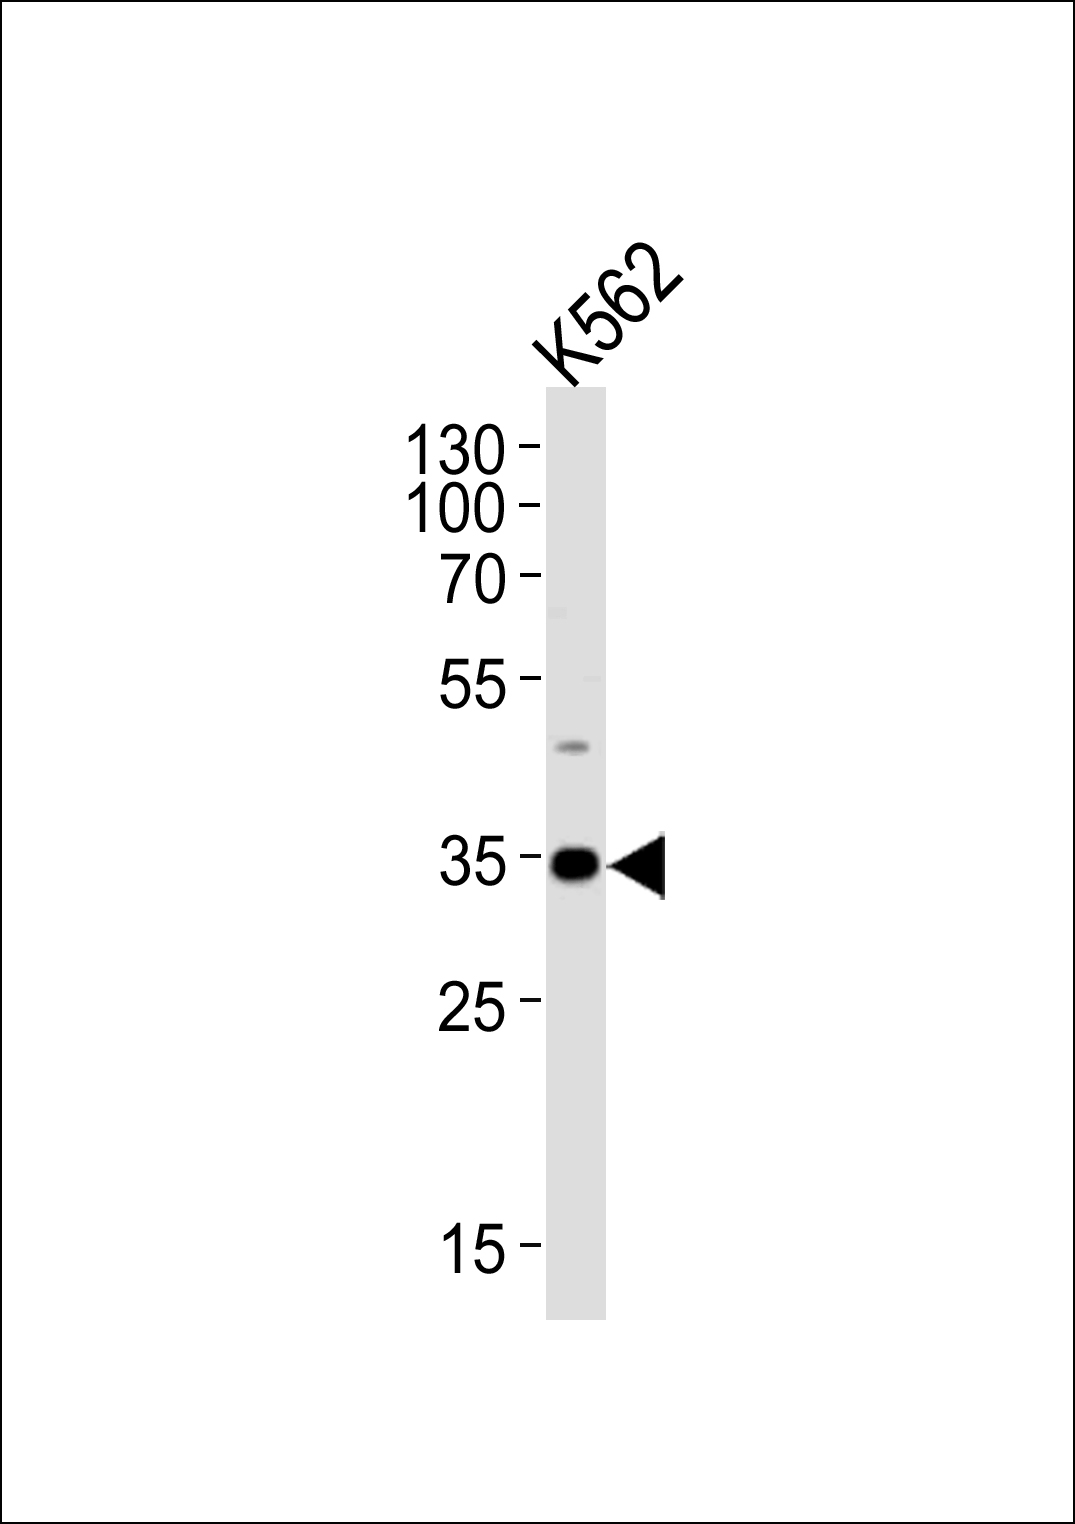 Western blot analysis of lysate from K562 cell line,  using BBS5 Antibody (Center)(Cat.  #AP20560a).  AP20560a was diluted at 1:1000.  A goat anti-rabbit IgG H&L(HRP) at 1:5000 dilution was used as the secondary antibody.  Lysate at 35ug.